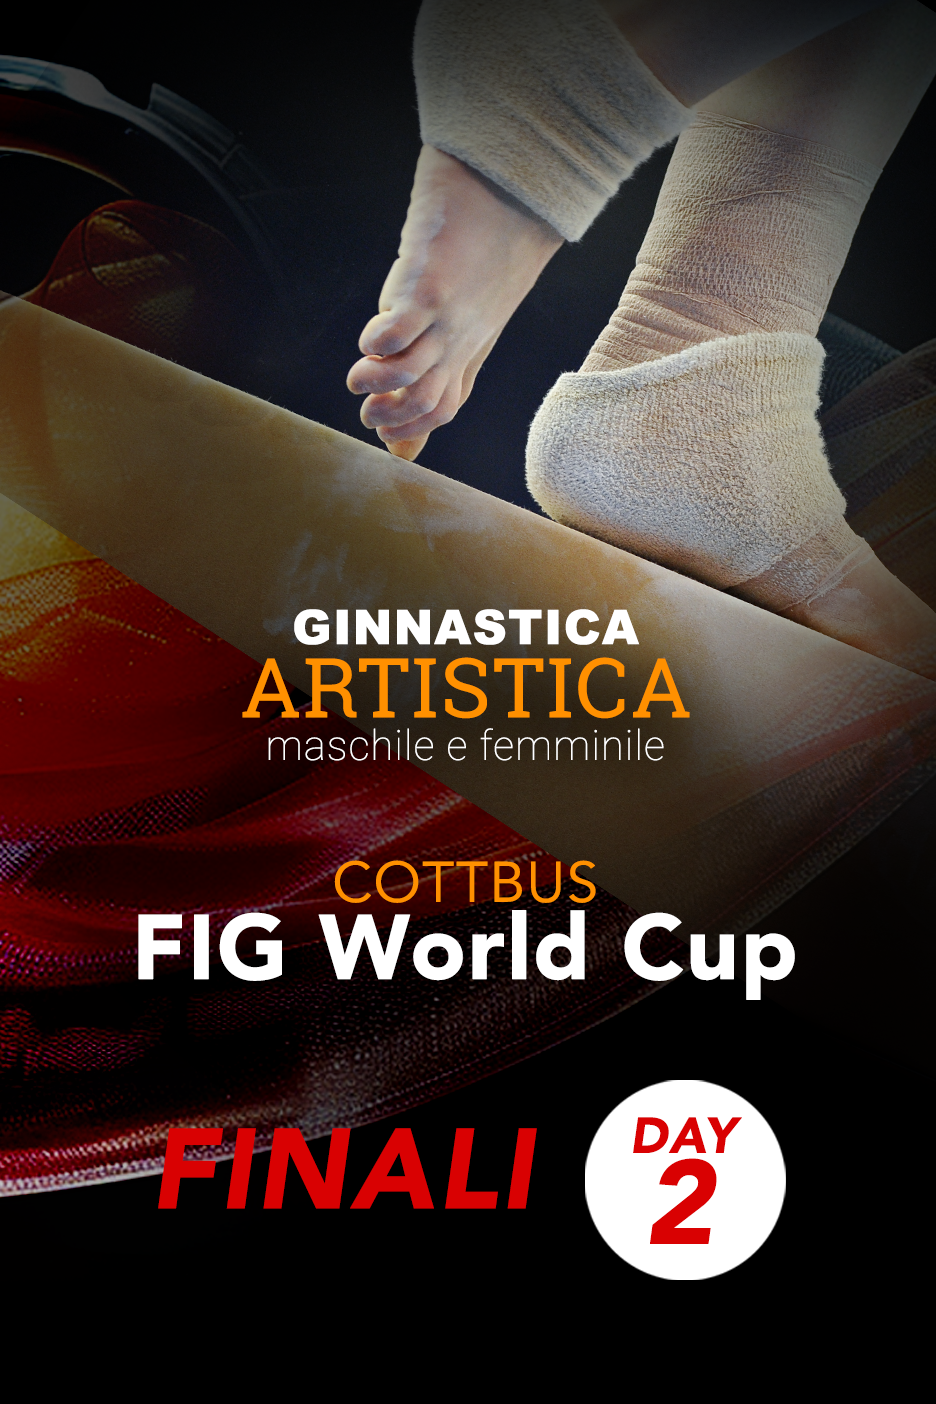 COTTBUS - FIG World Cup - Finals Day 2 